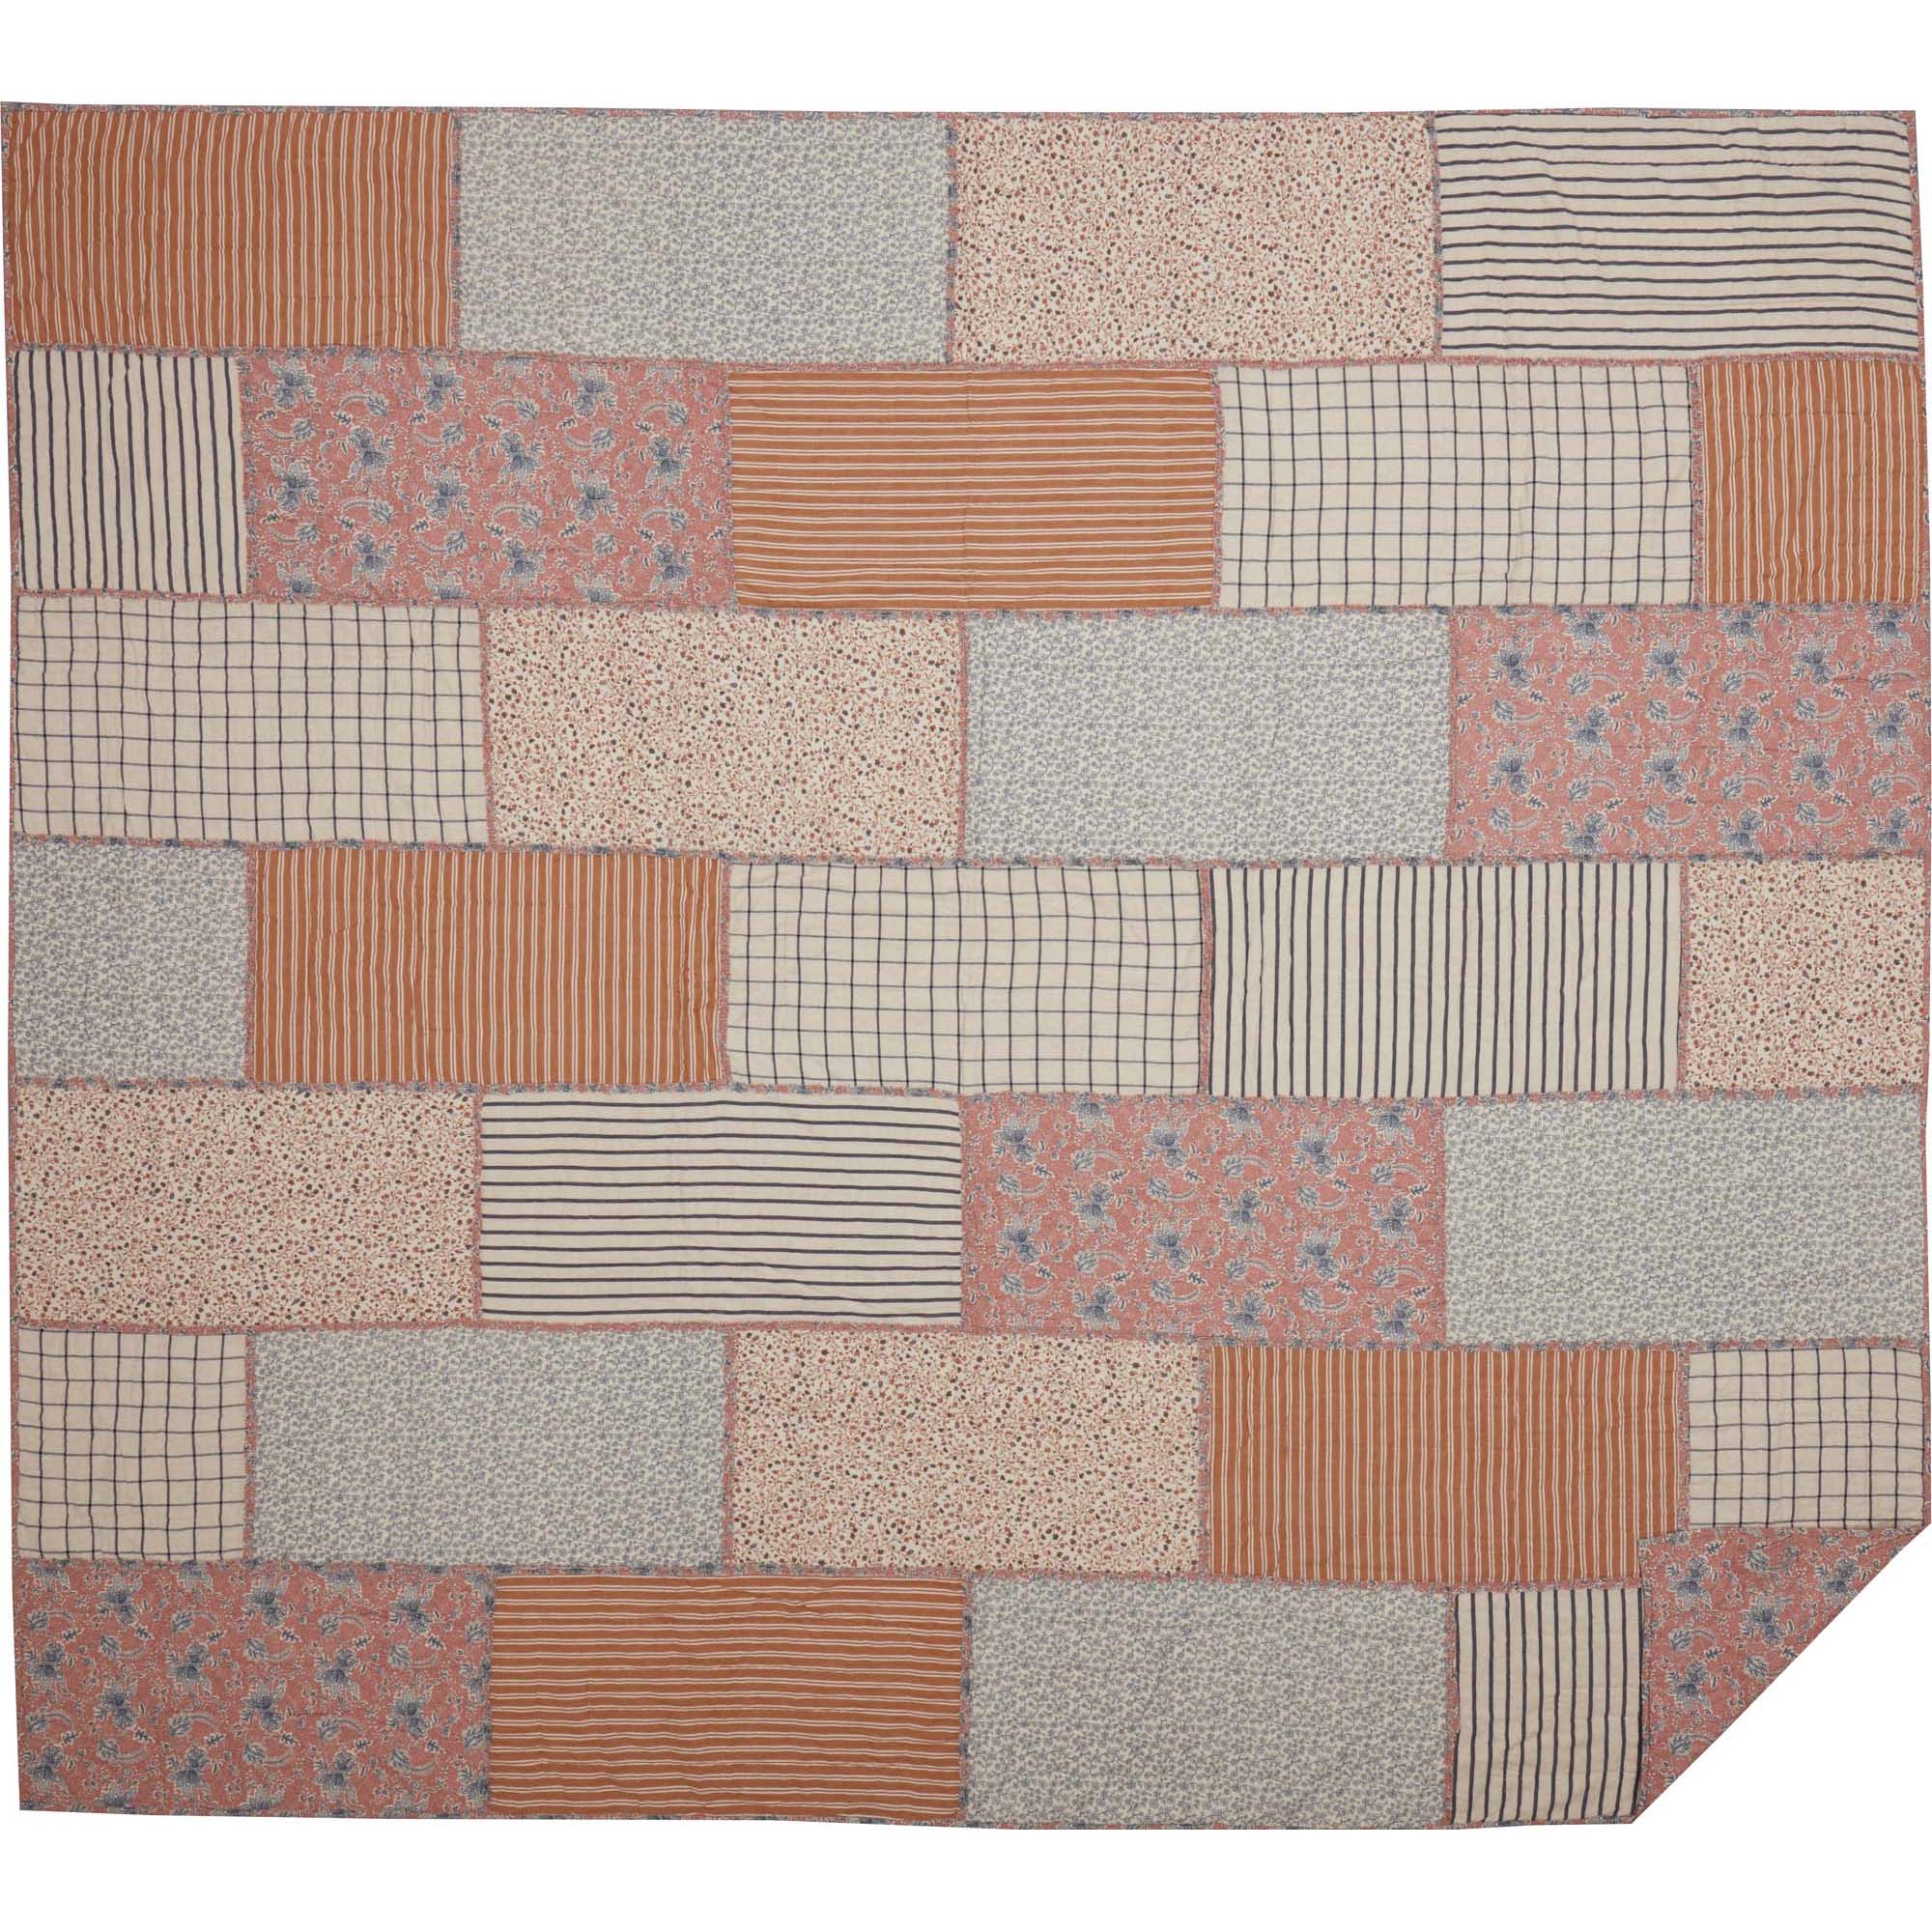 Kaila King Quilt 105Wx95L VHC Brands